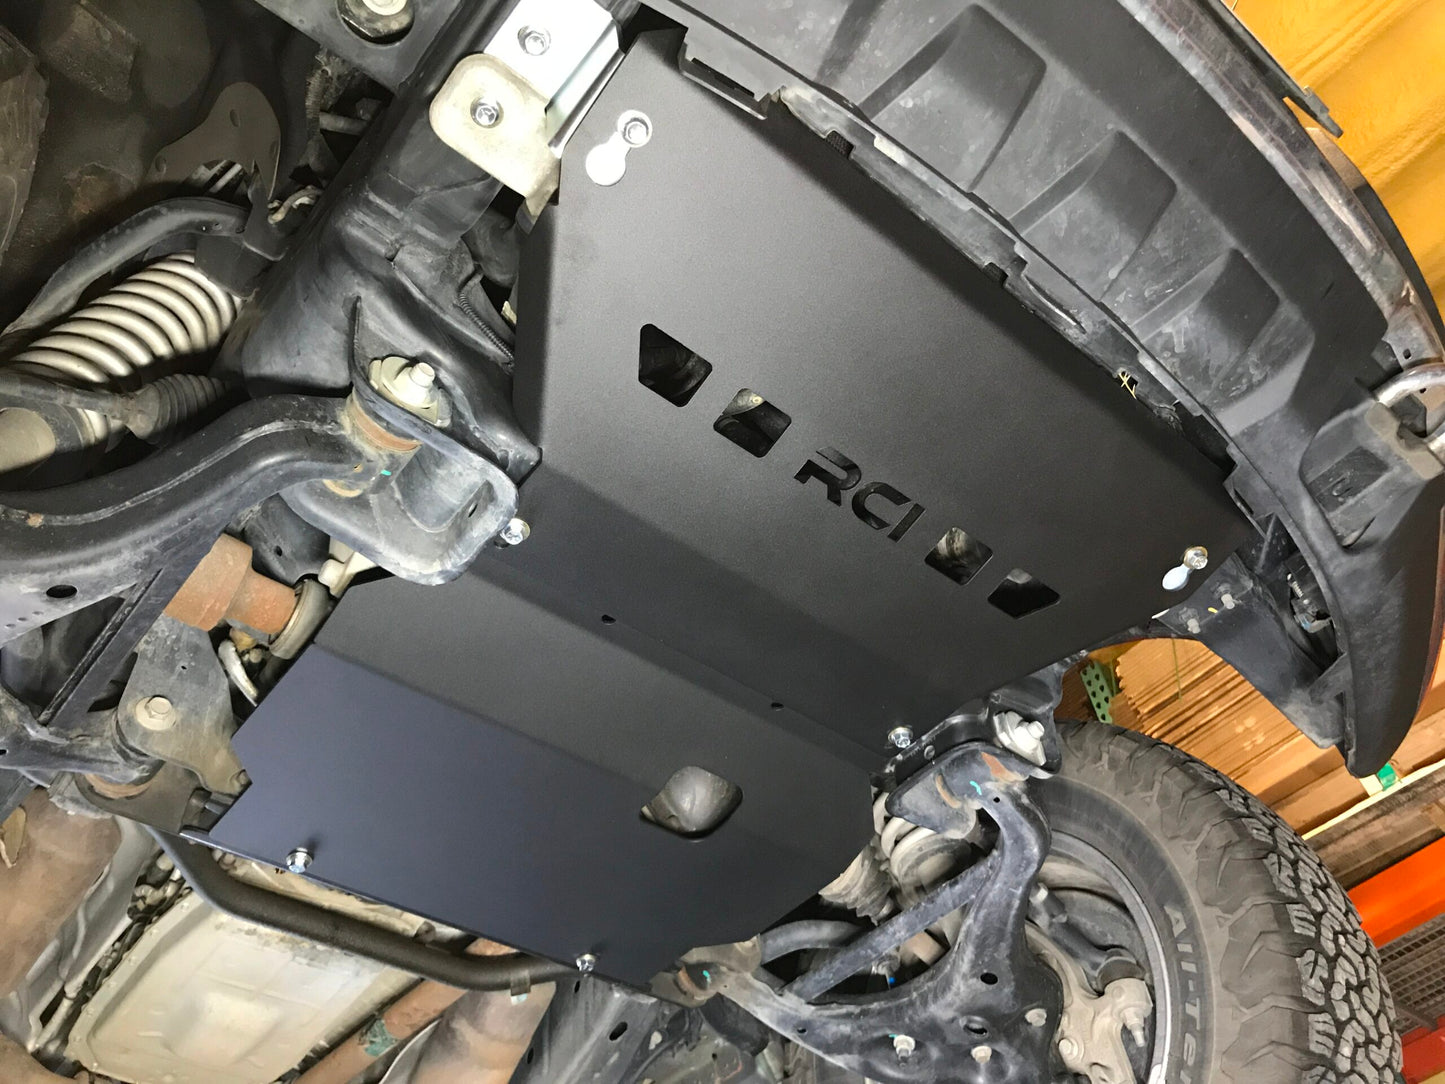 RCI OffRoad 2015-2024 Ford F-150 Engine Skid Plate